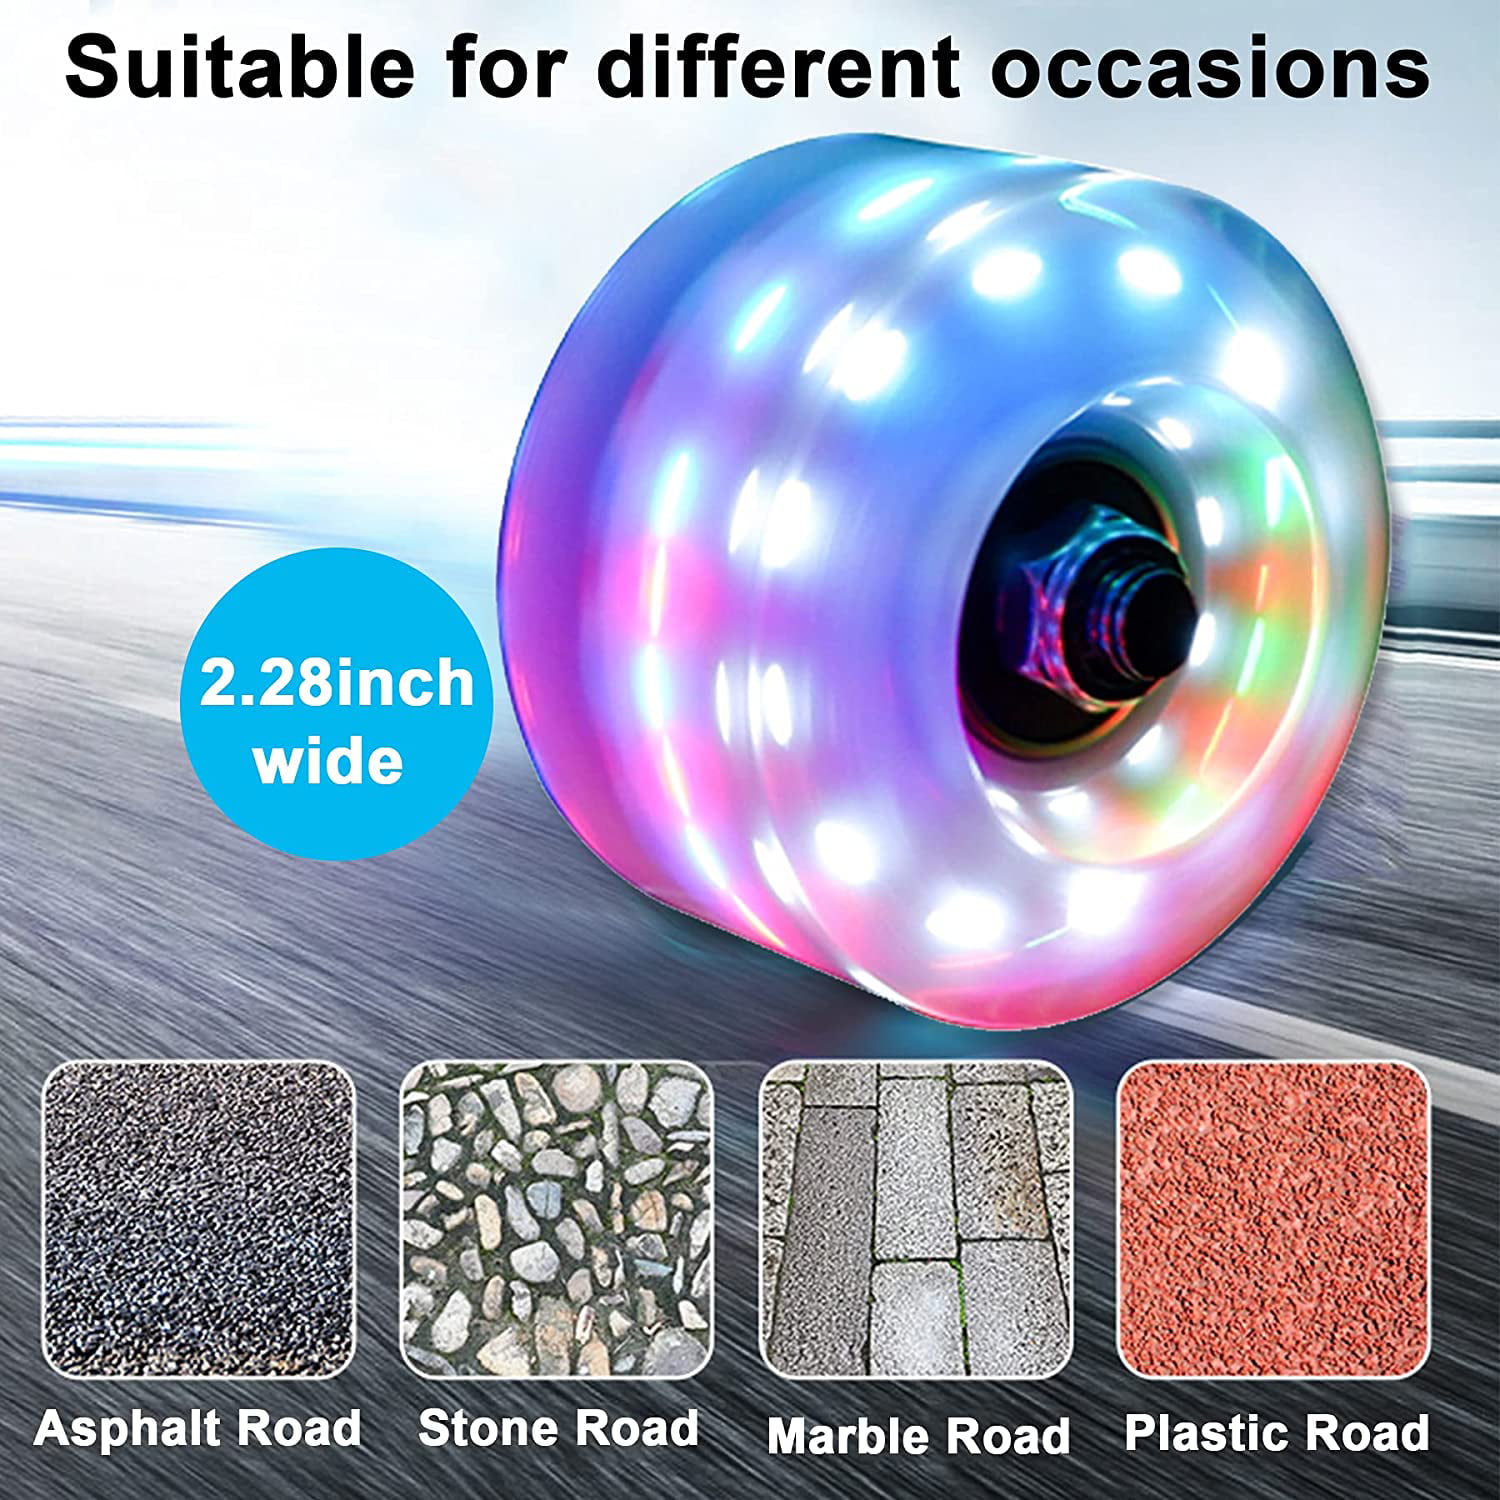 Roller Skate Wheels with Bearings Installed Replace Rollerskate Wheels for Double Row Skating and Skateboard 32 x 58mm 8 Pcs Outdoor Light Up Rainbow Quad Rollerskate Parts Tool Wheels Pink